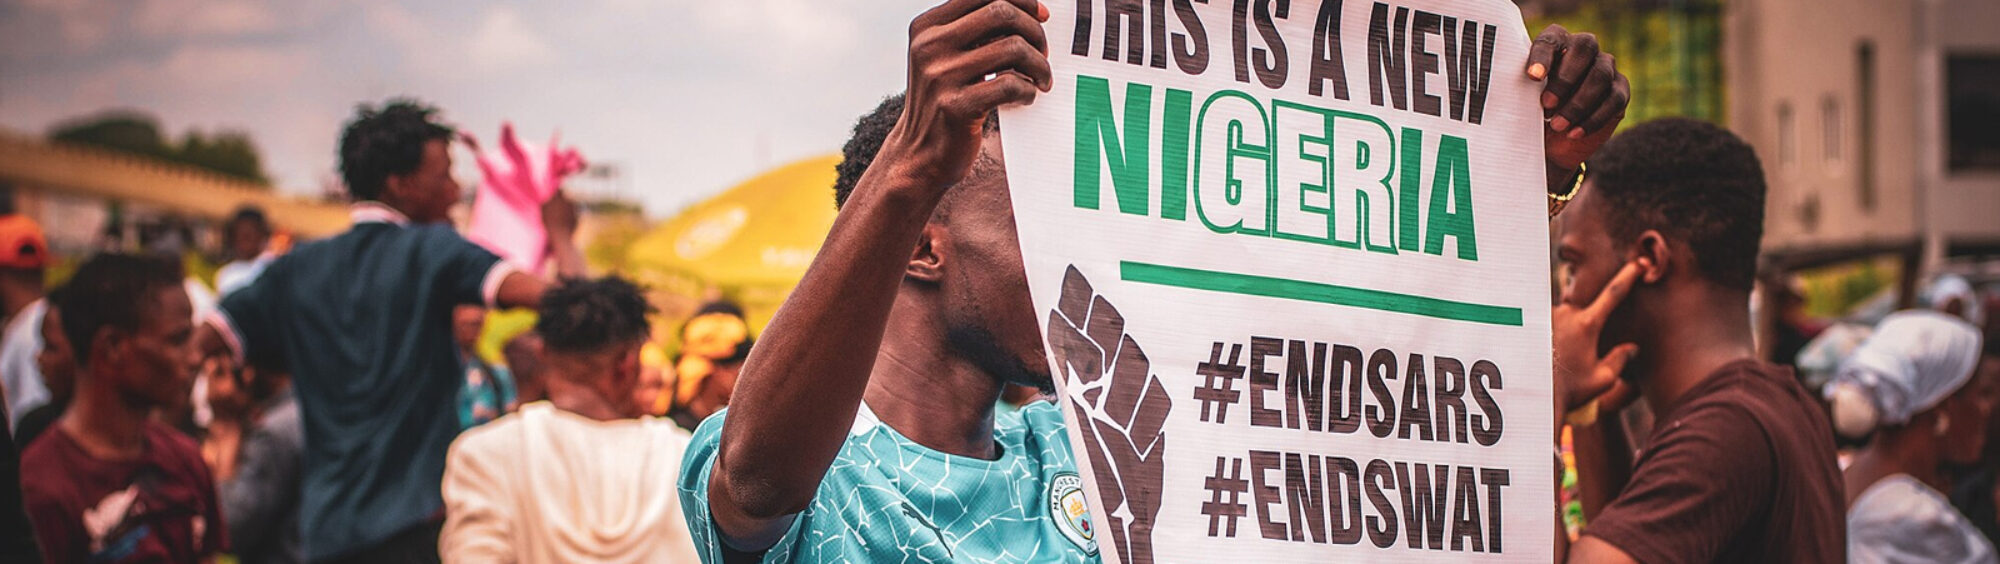 This is a photo of a Nigerian man holding up a placard with these words on them. This is a new Nigeria. #ENDSARS #ENDSWAT.